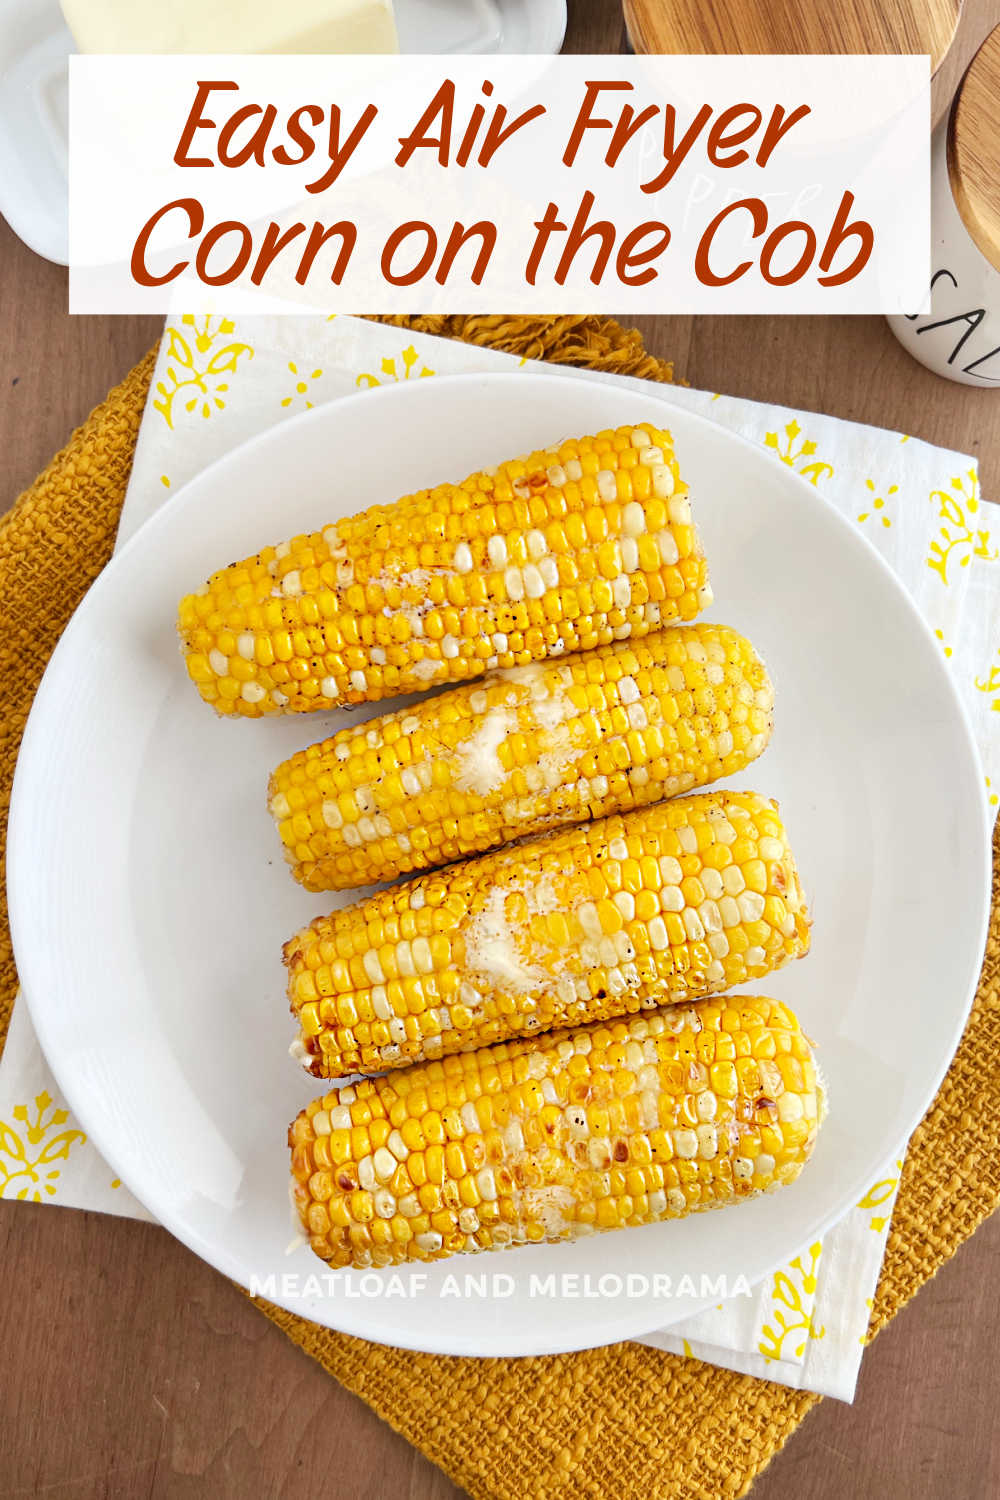 This Air Fryer Corn on the Cob recipe is a quick and easy way to cook fresh corn on the cob. Air fry corn in foil or without for the perfect side dish in minutes! via @meamel